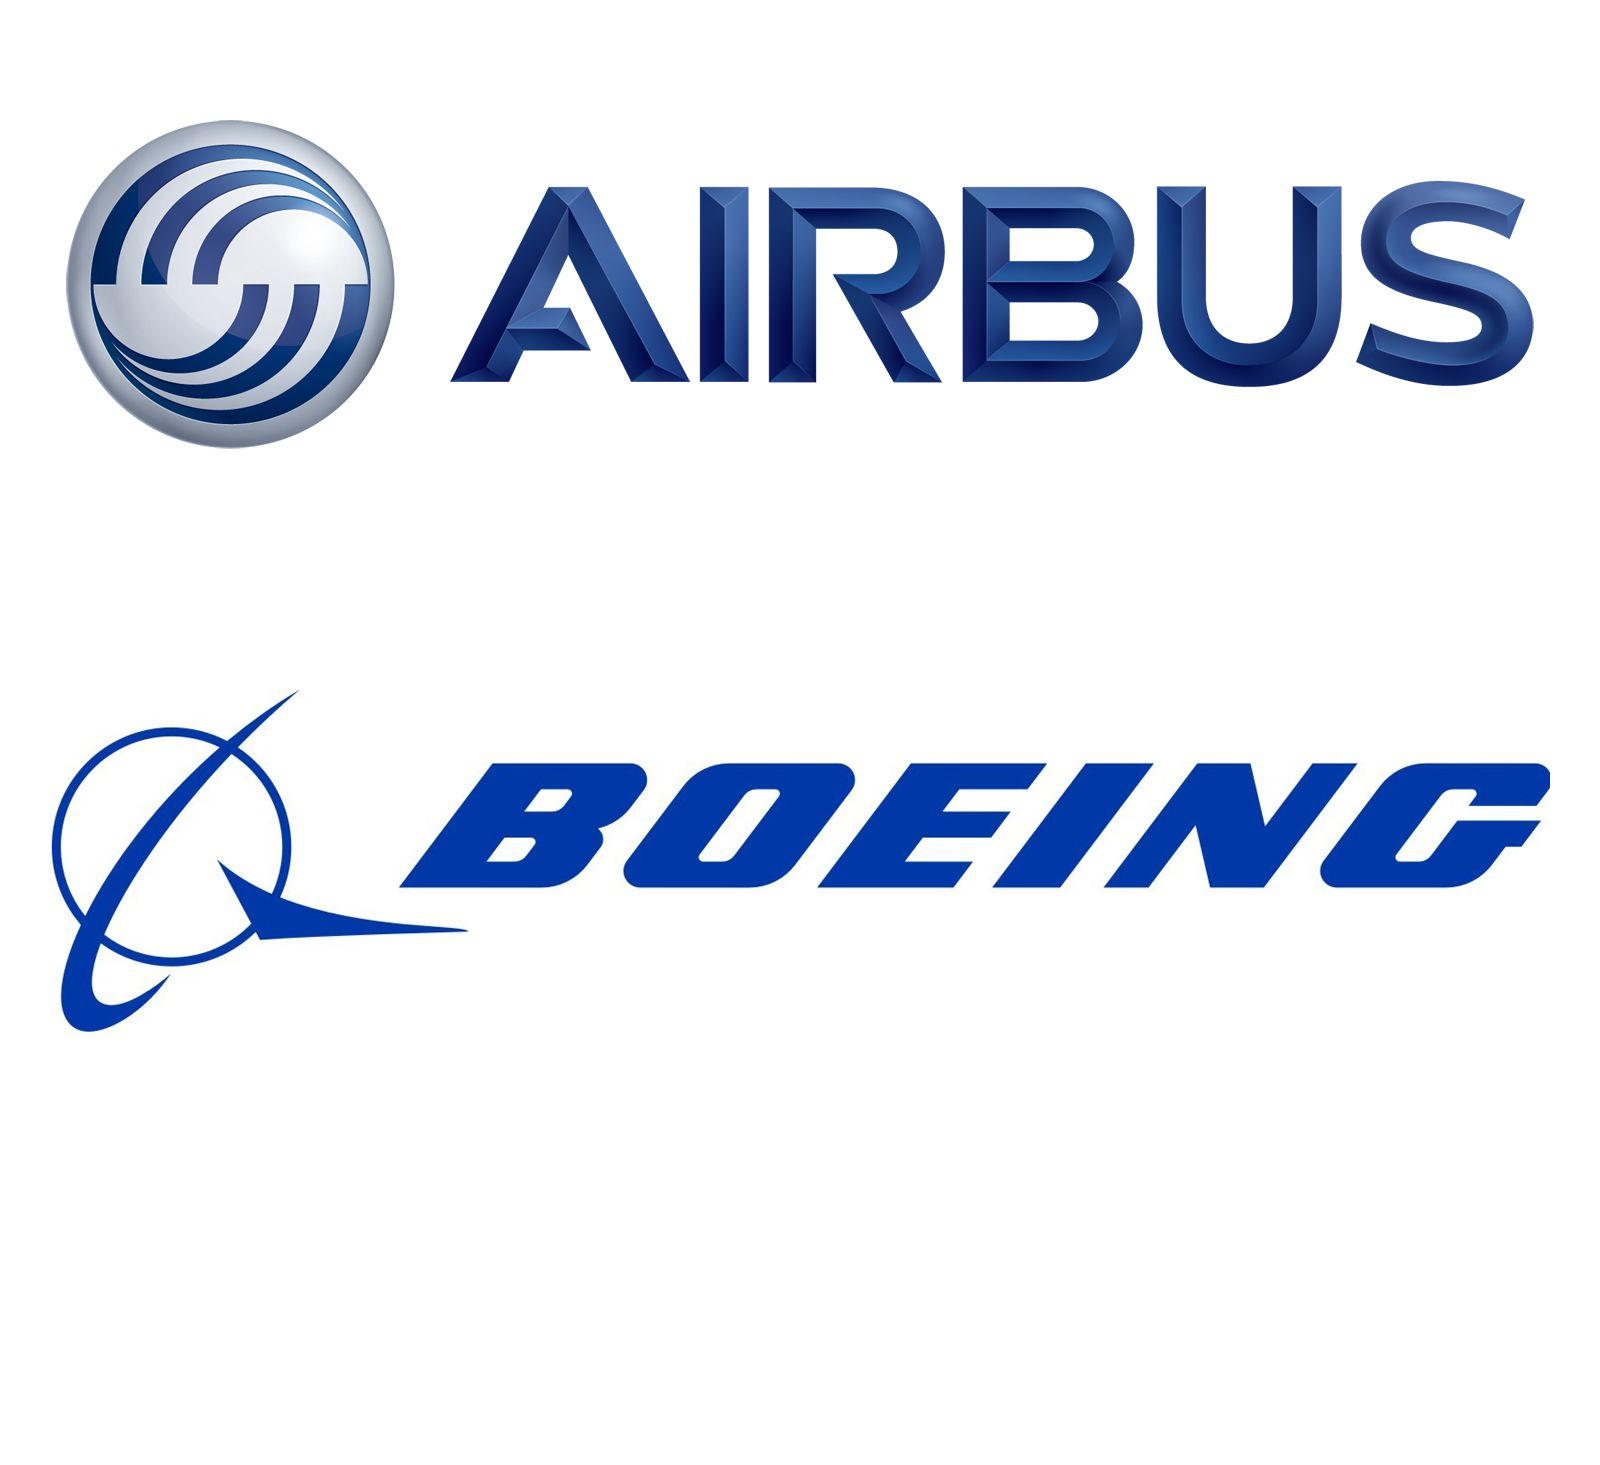 Best Known for Its Airplanes Logo - Top Selling Airplanes in Commercial Aviation History